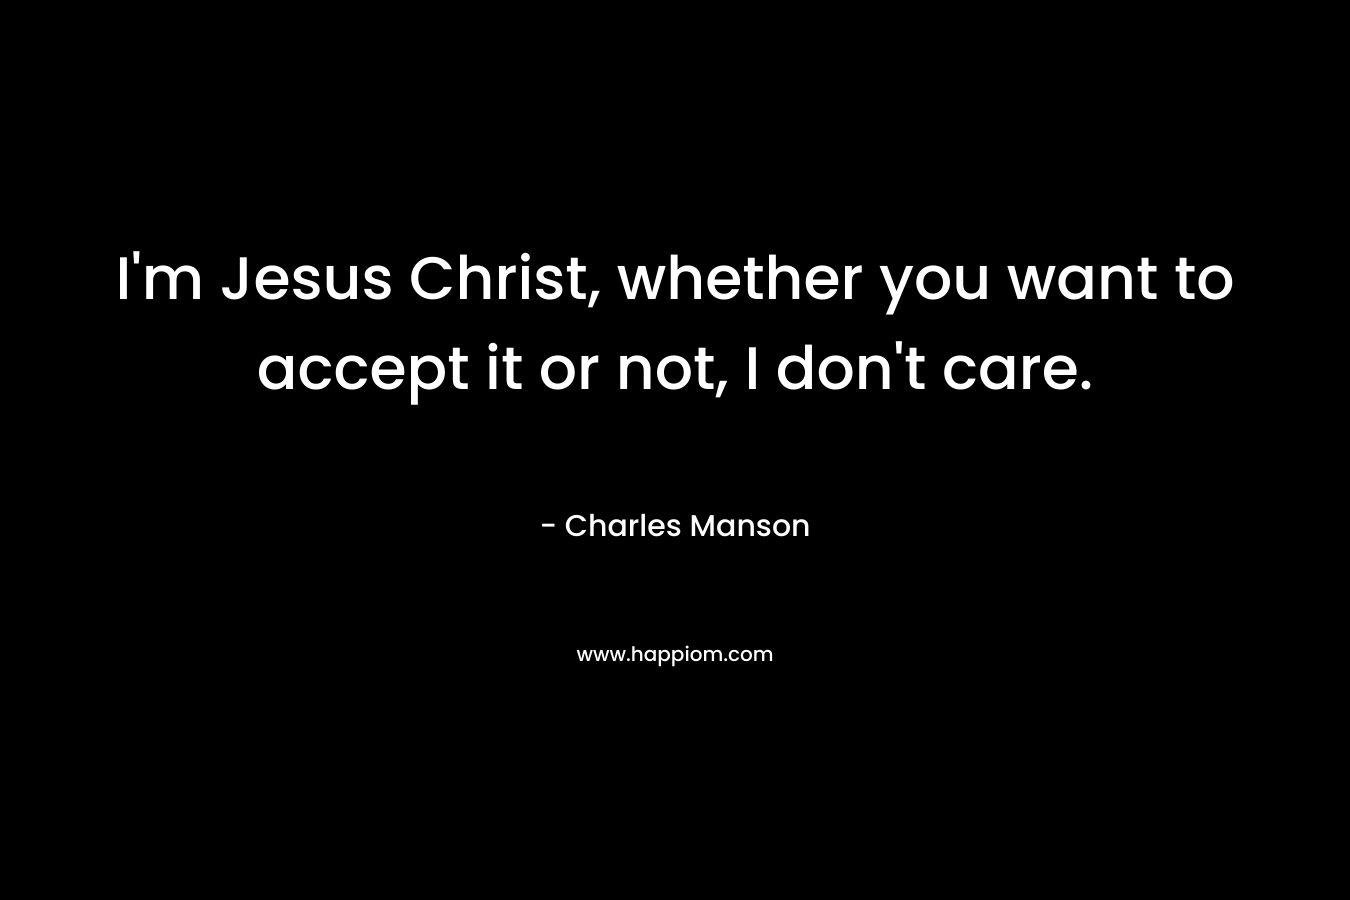 I’m Jesus Christ, whether you want to accept it or not, I don’t care. – Charles Manson